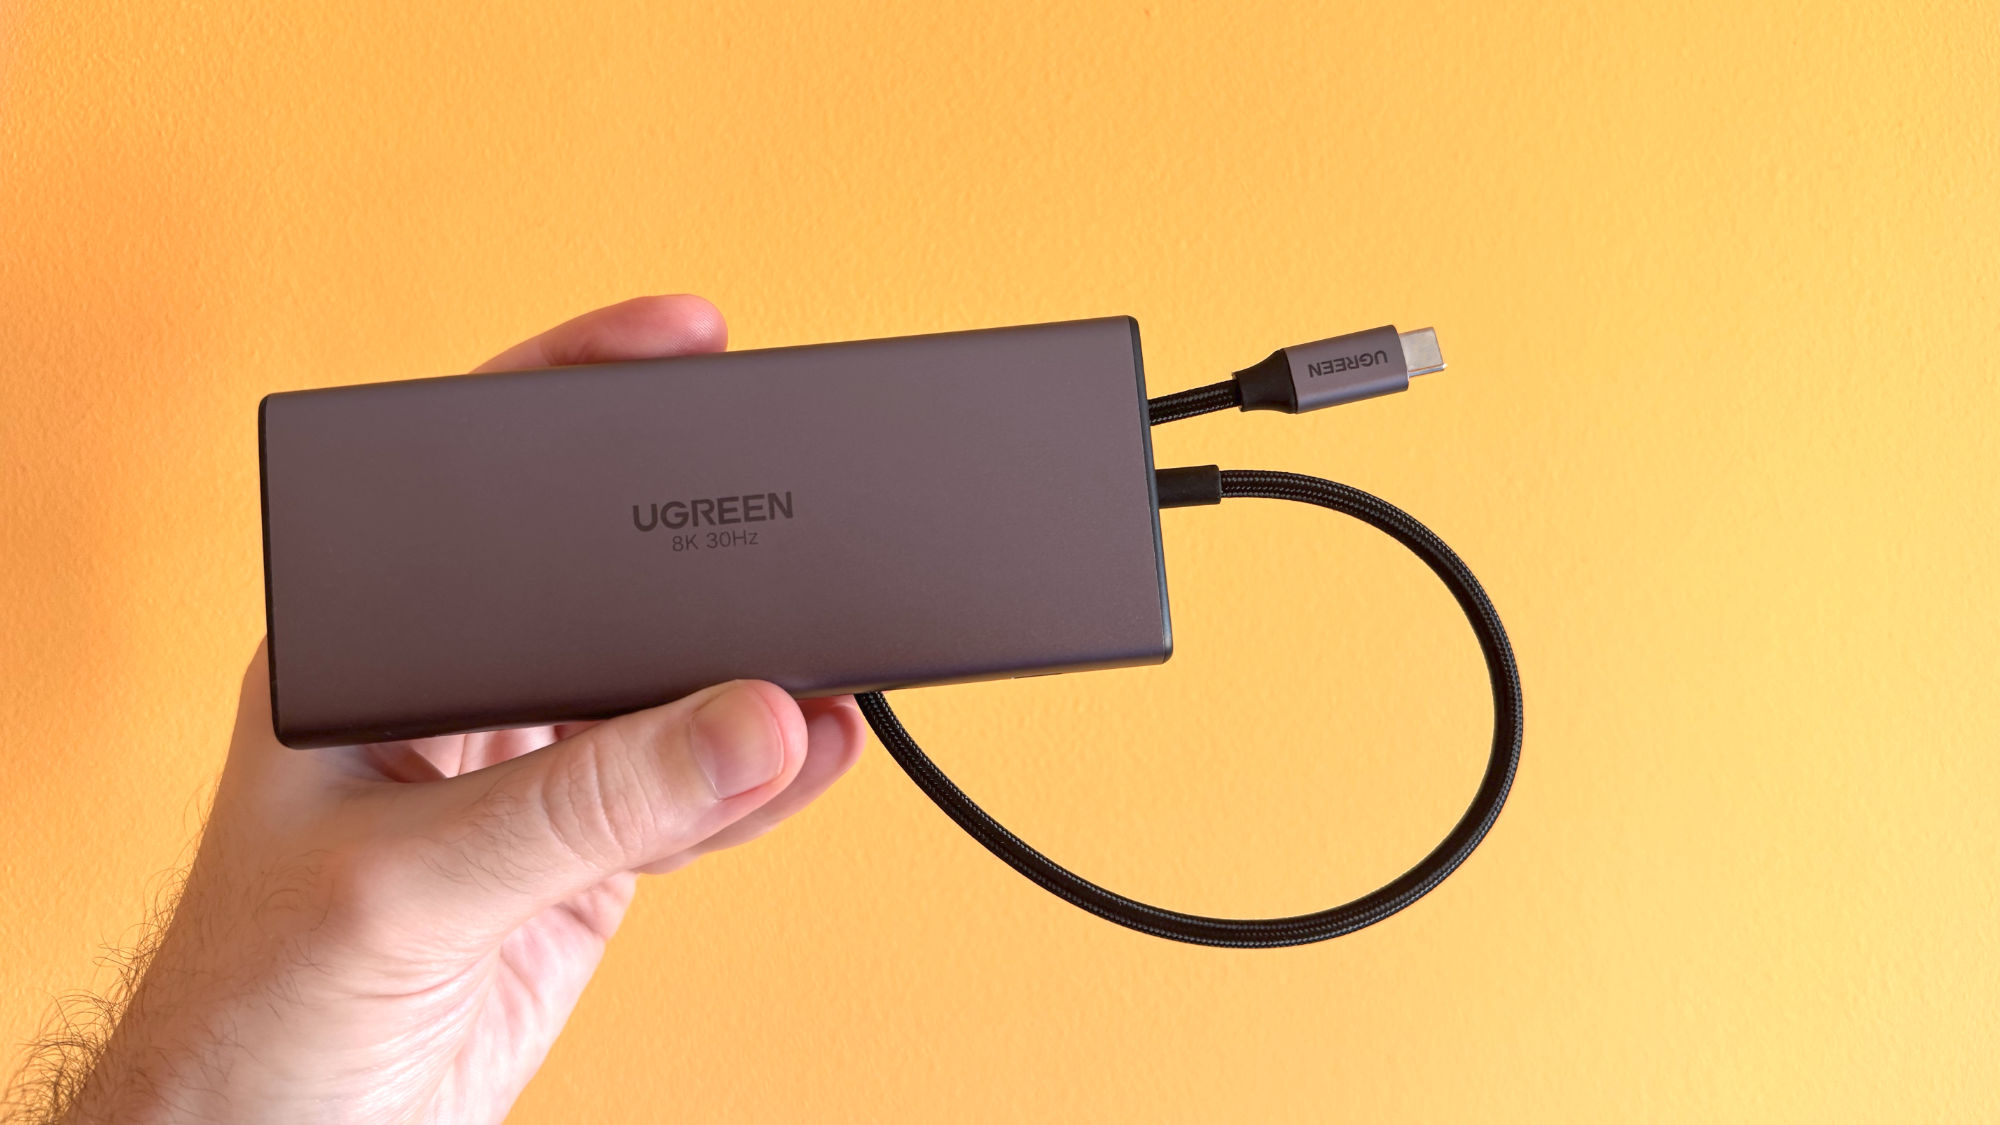 UGREEN Revodok Pro 210, review: A dock that can handle everything